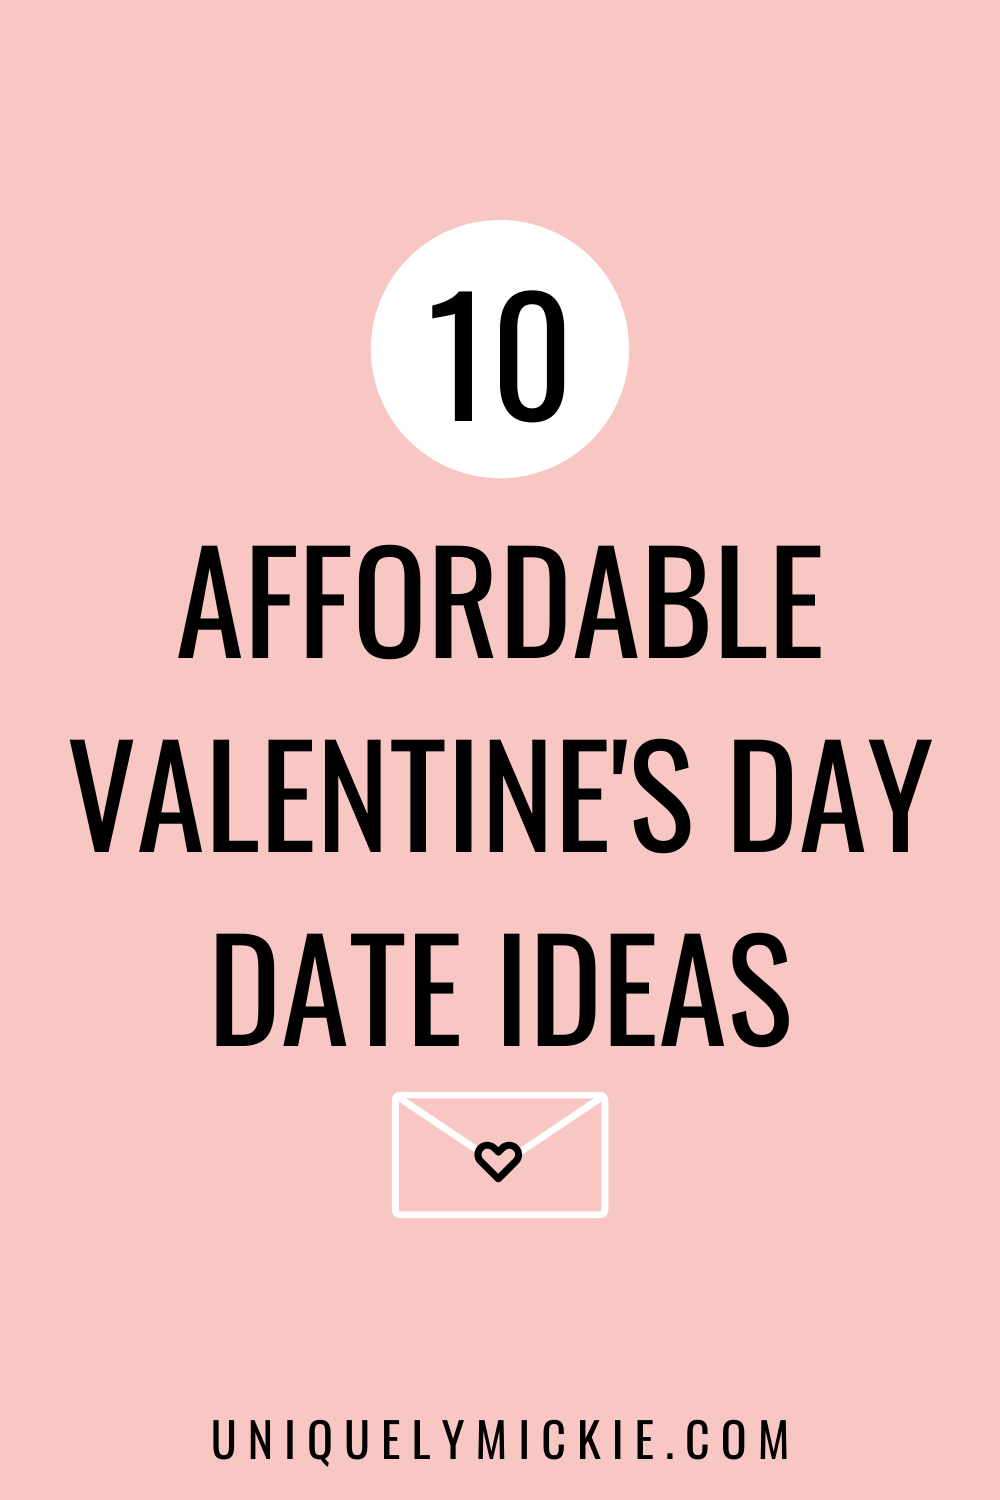 In today’s blog post, I’m sharing 10 Valentine’s Day Date ideas that are cheap, affordable, and a whole lot of fun. You don’t have to spend a ton of money to have a great day celebrating your loved ones or friends. 